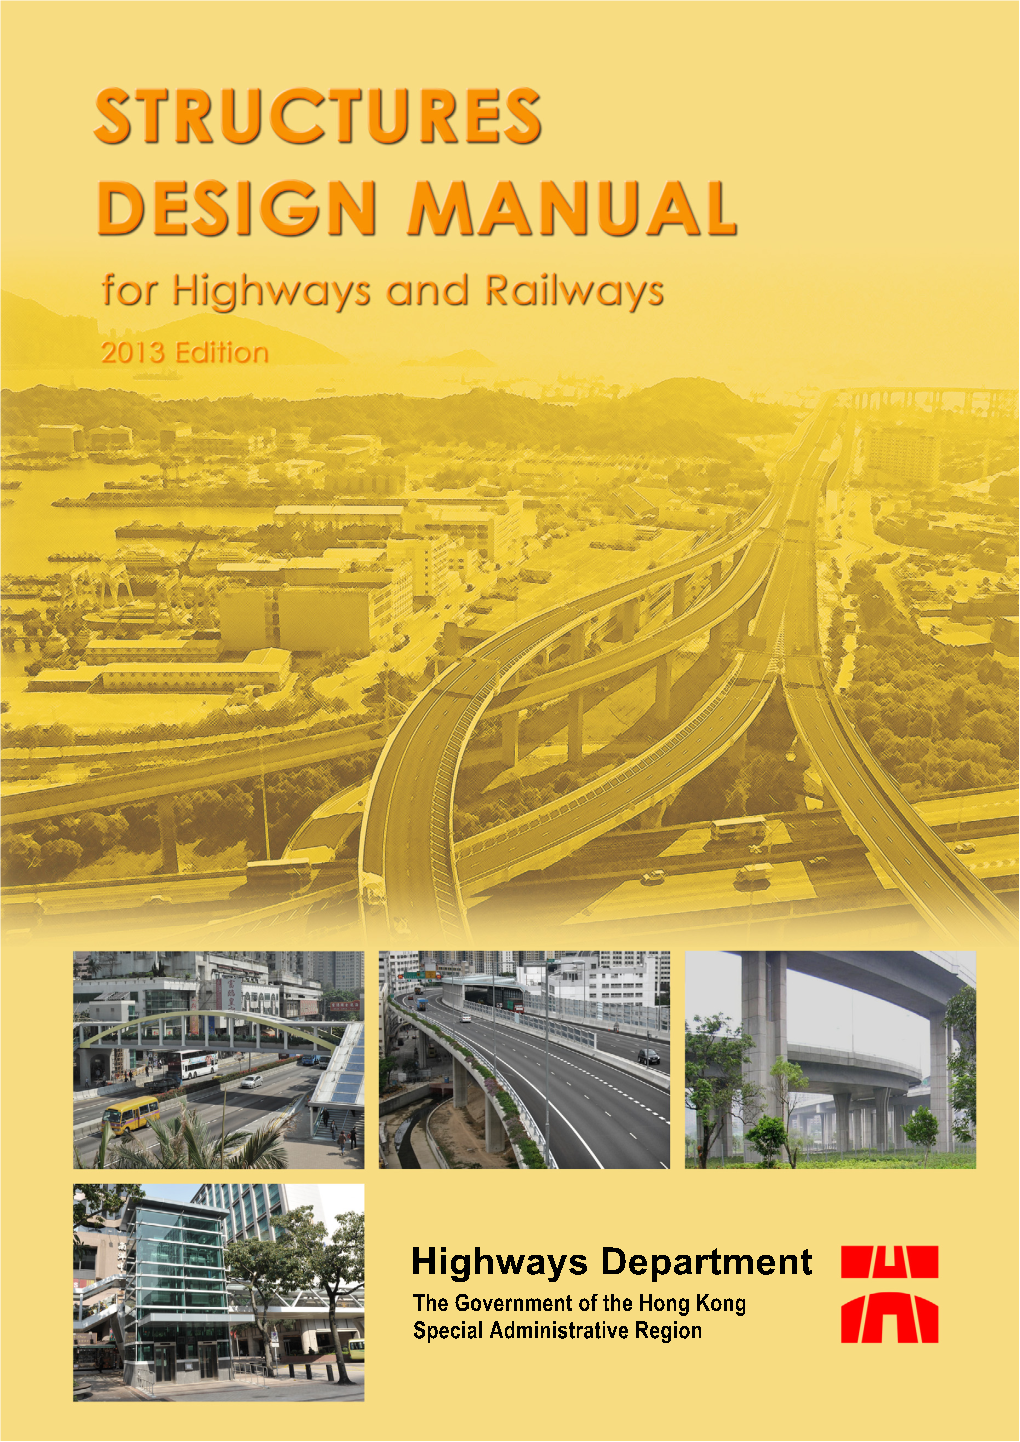 Structures Design Manual for Highways and Railways 2013 Edition